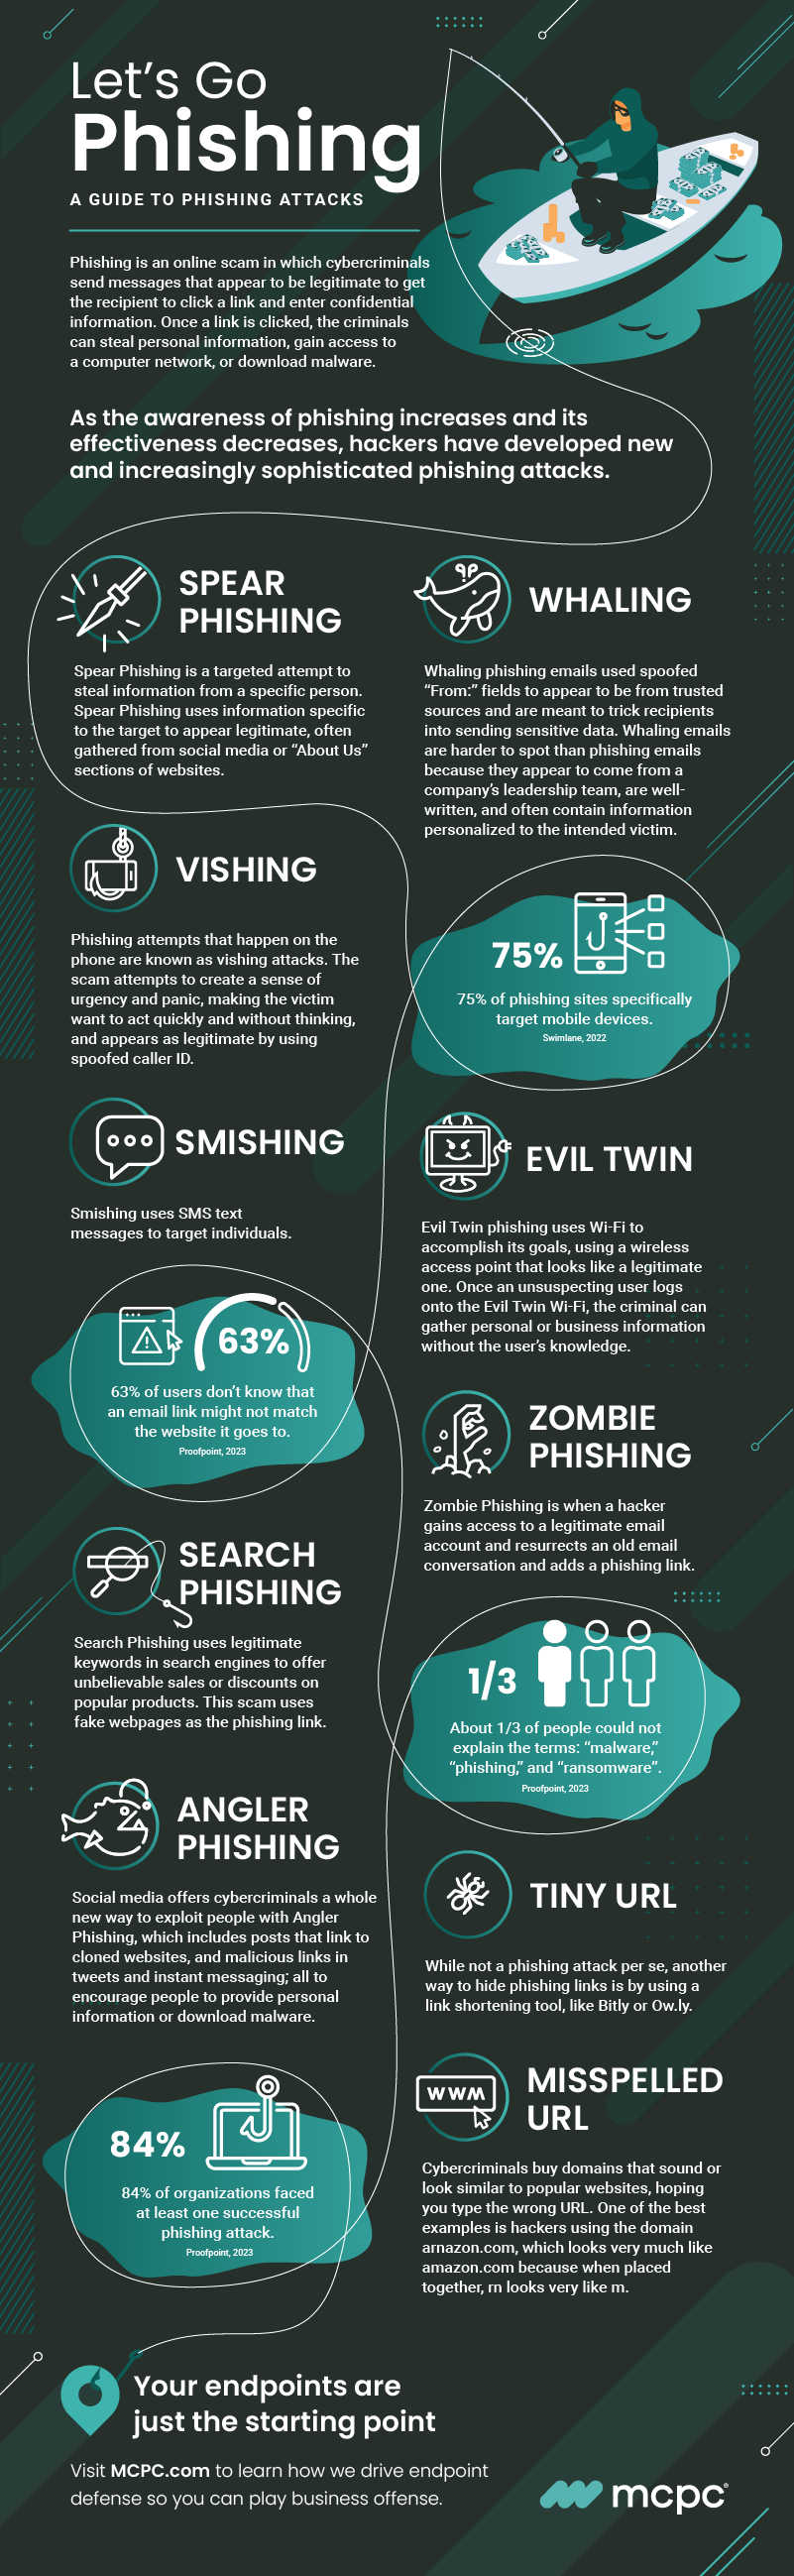 Infographic entitled Let’s Go Phishing is an illustrated guide to the different types of phishing attacks.